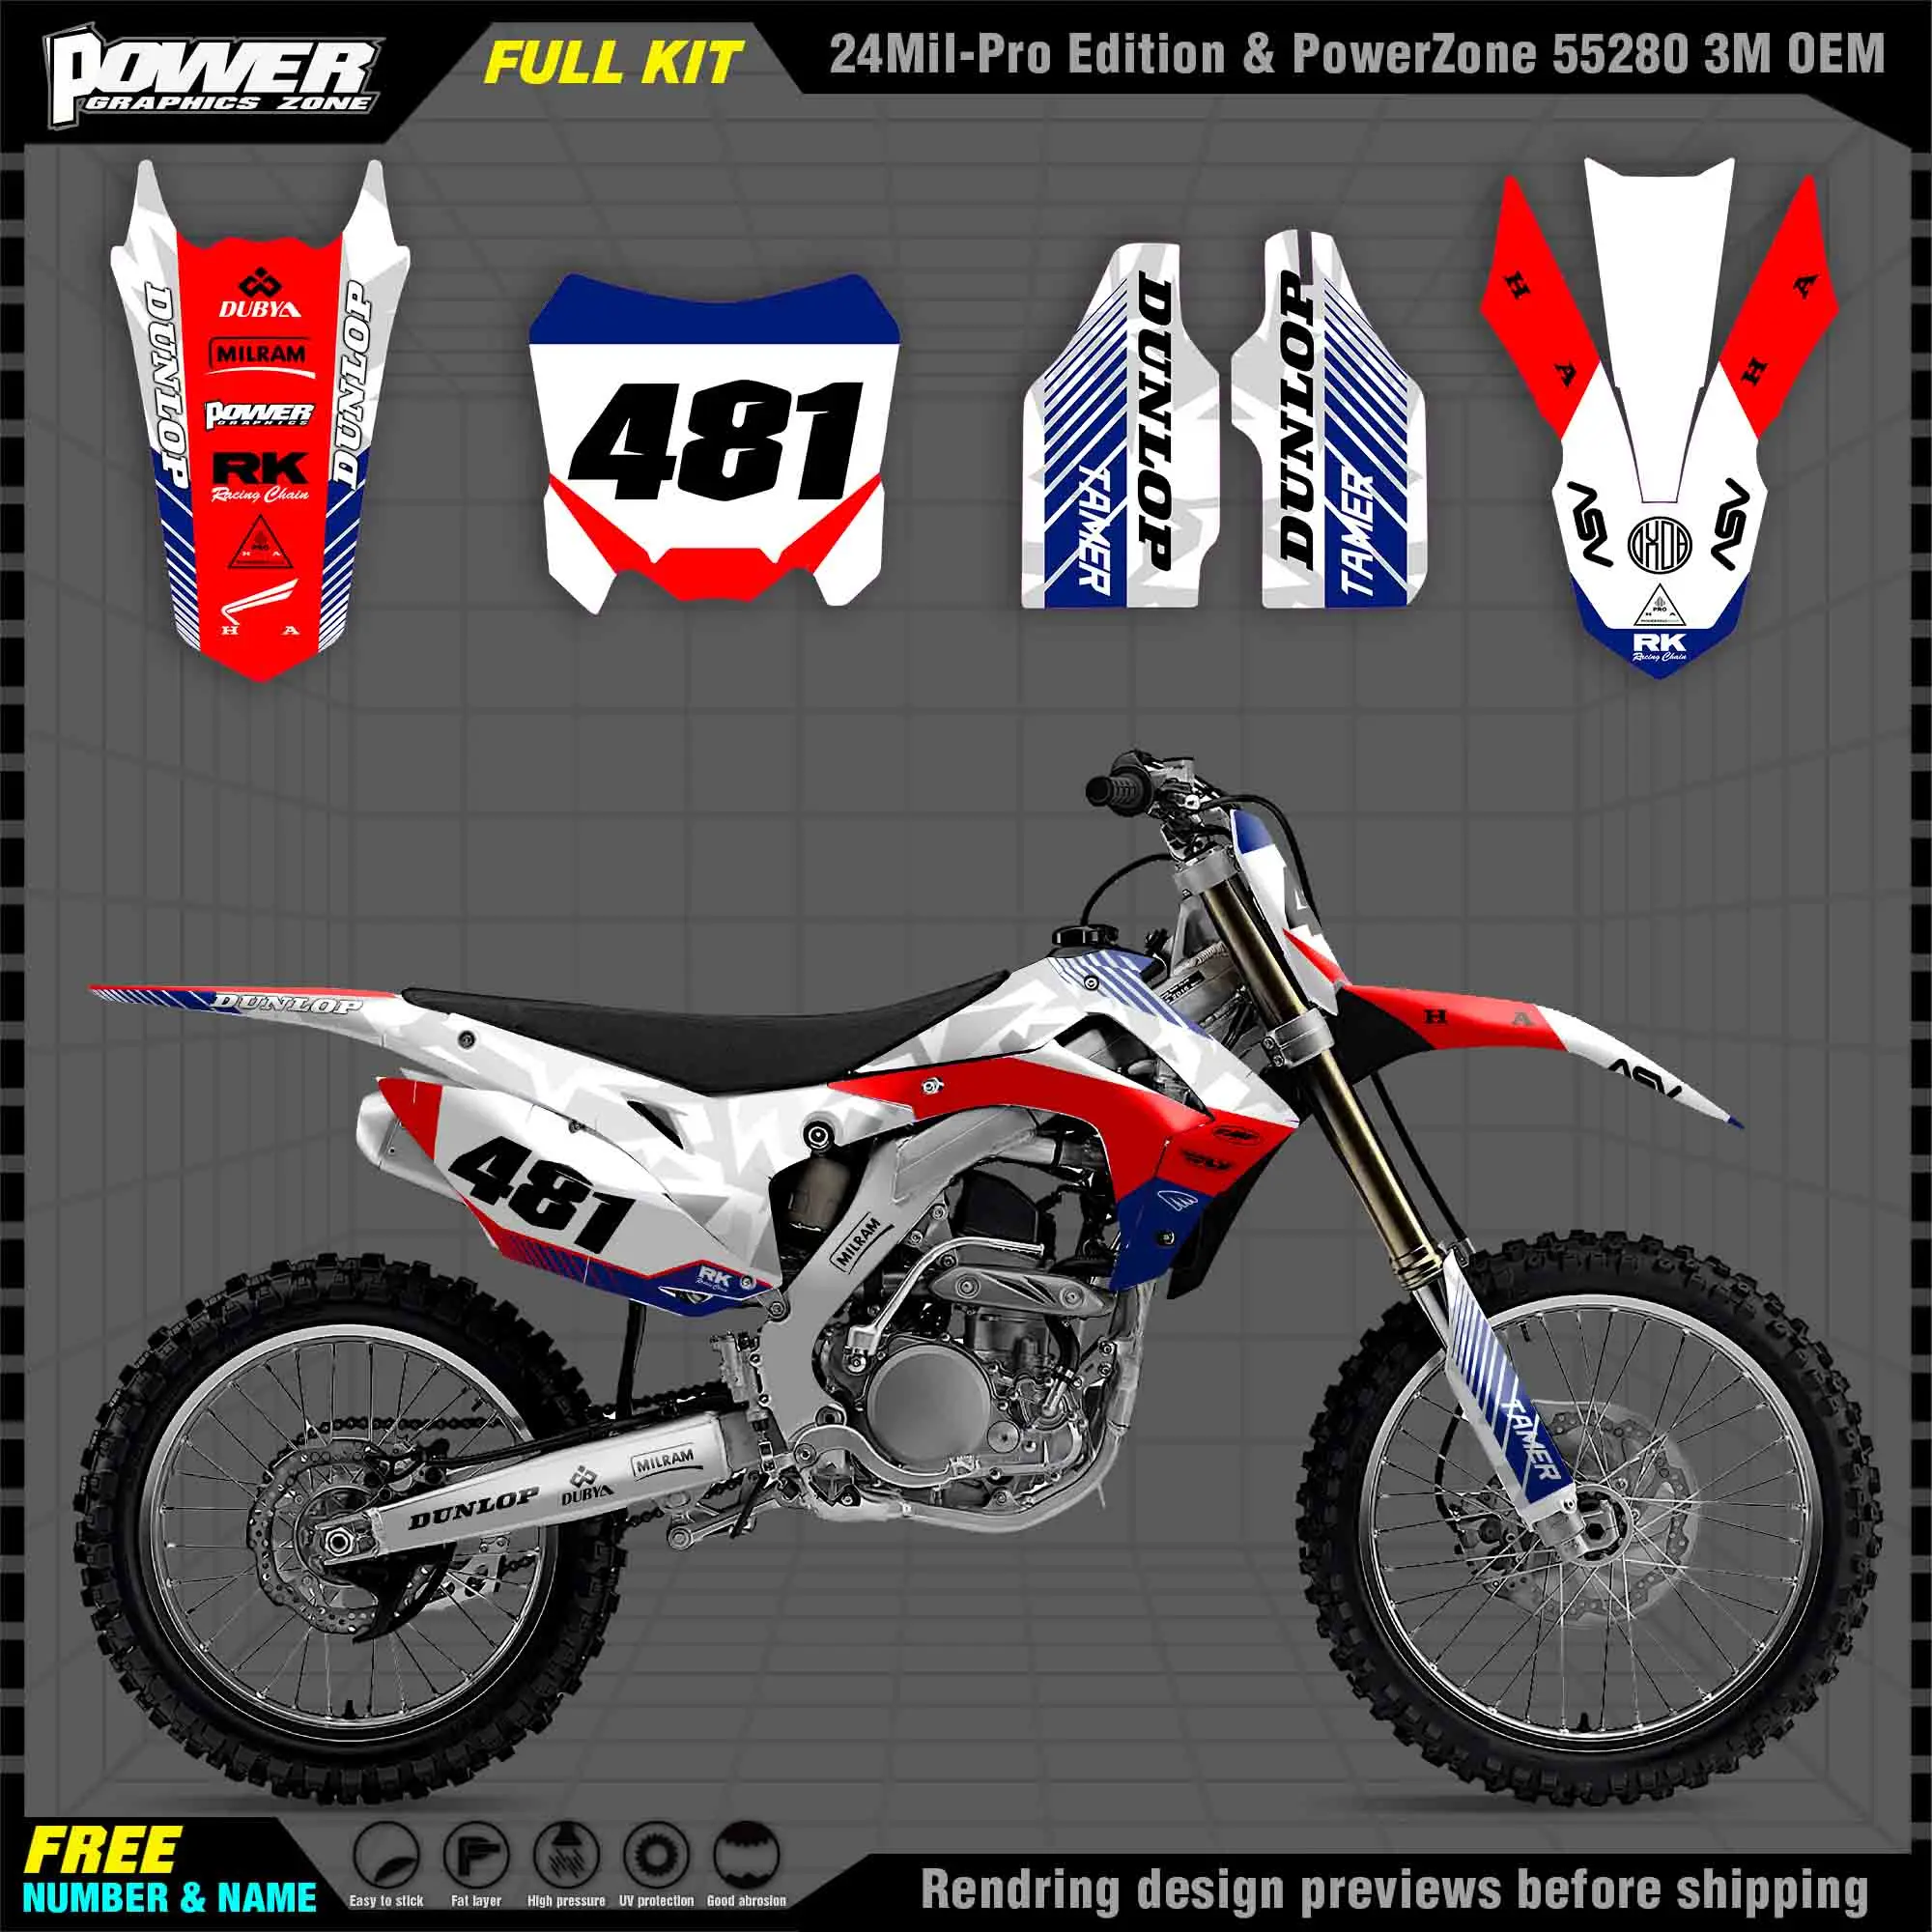 

PowerZone Custom Team Graphics Backgrounds Decals 3M Stickers Kit For HONDA 2014-2017 CRF250R 2013-2016 CRF450R 012